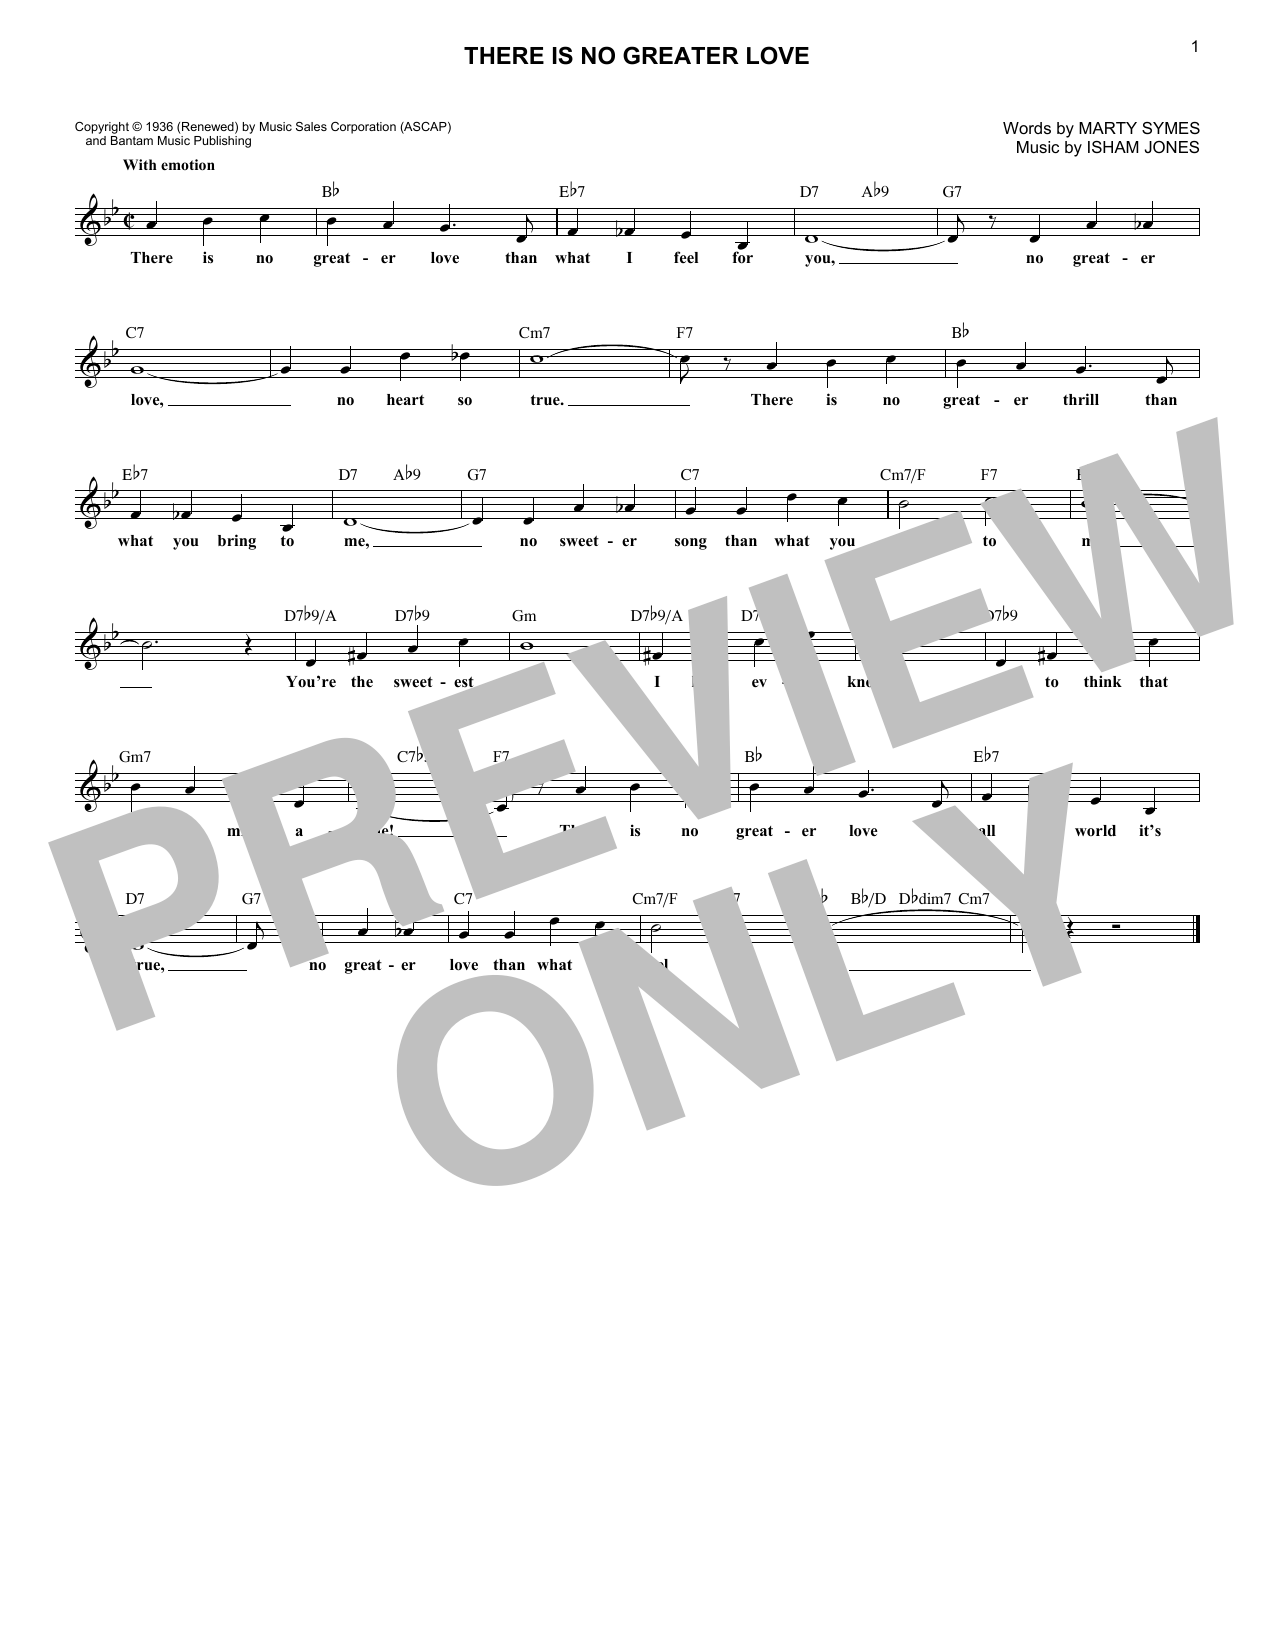 Download Isham Jones (There Is) No Greater Love Sheet Music